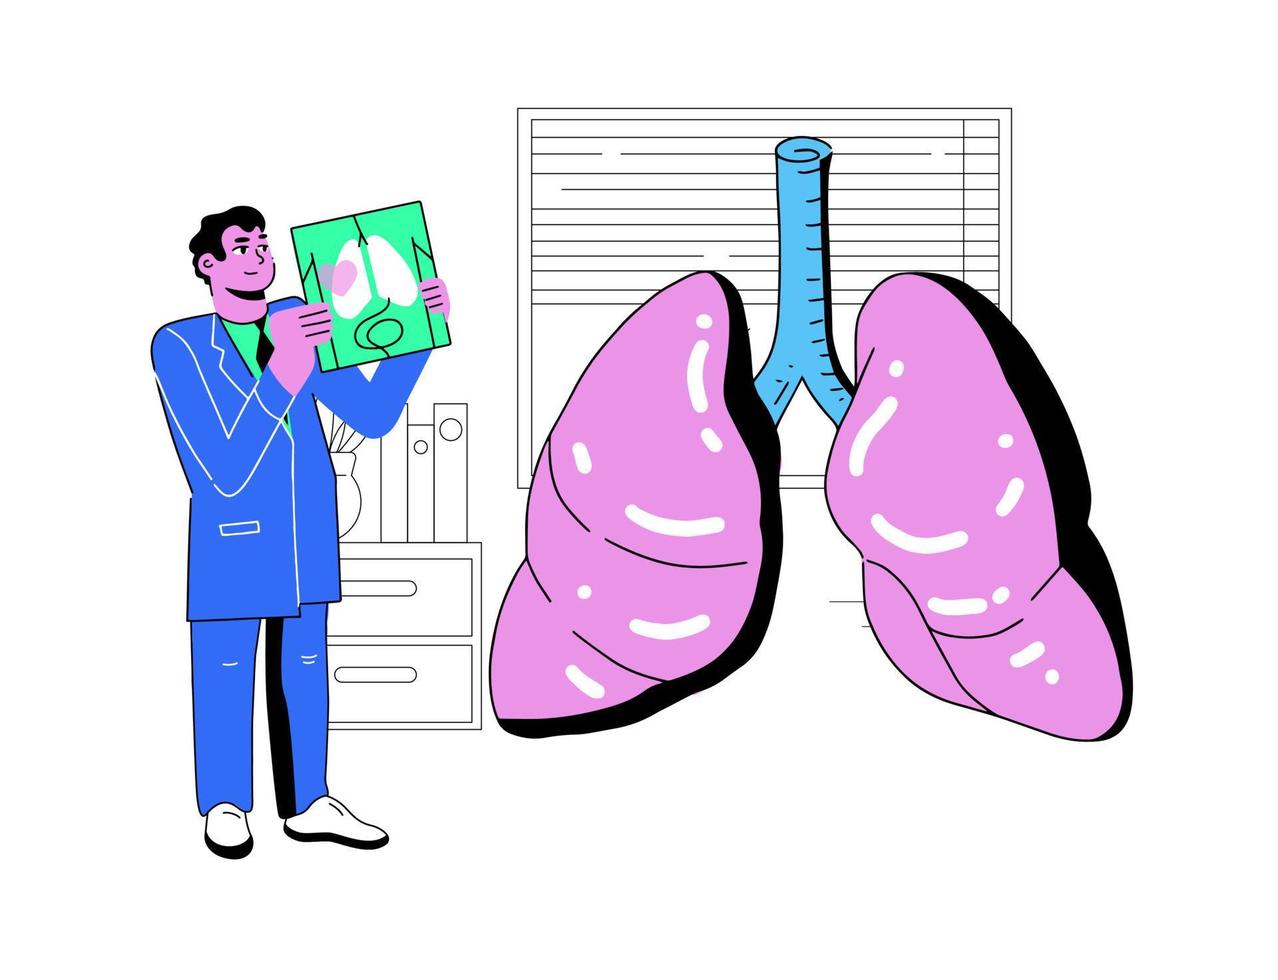 The Doctor examines the big Lungs. Vector illustration in neobrutalism style. Pulmonologist conducts research on the lungs. Nurse stands and holds a snapshot scan